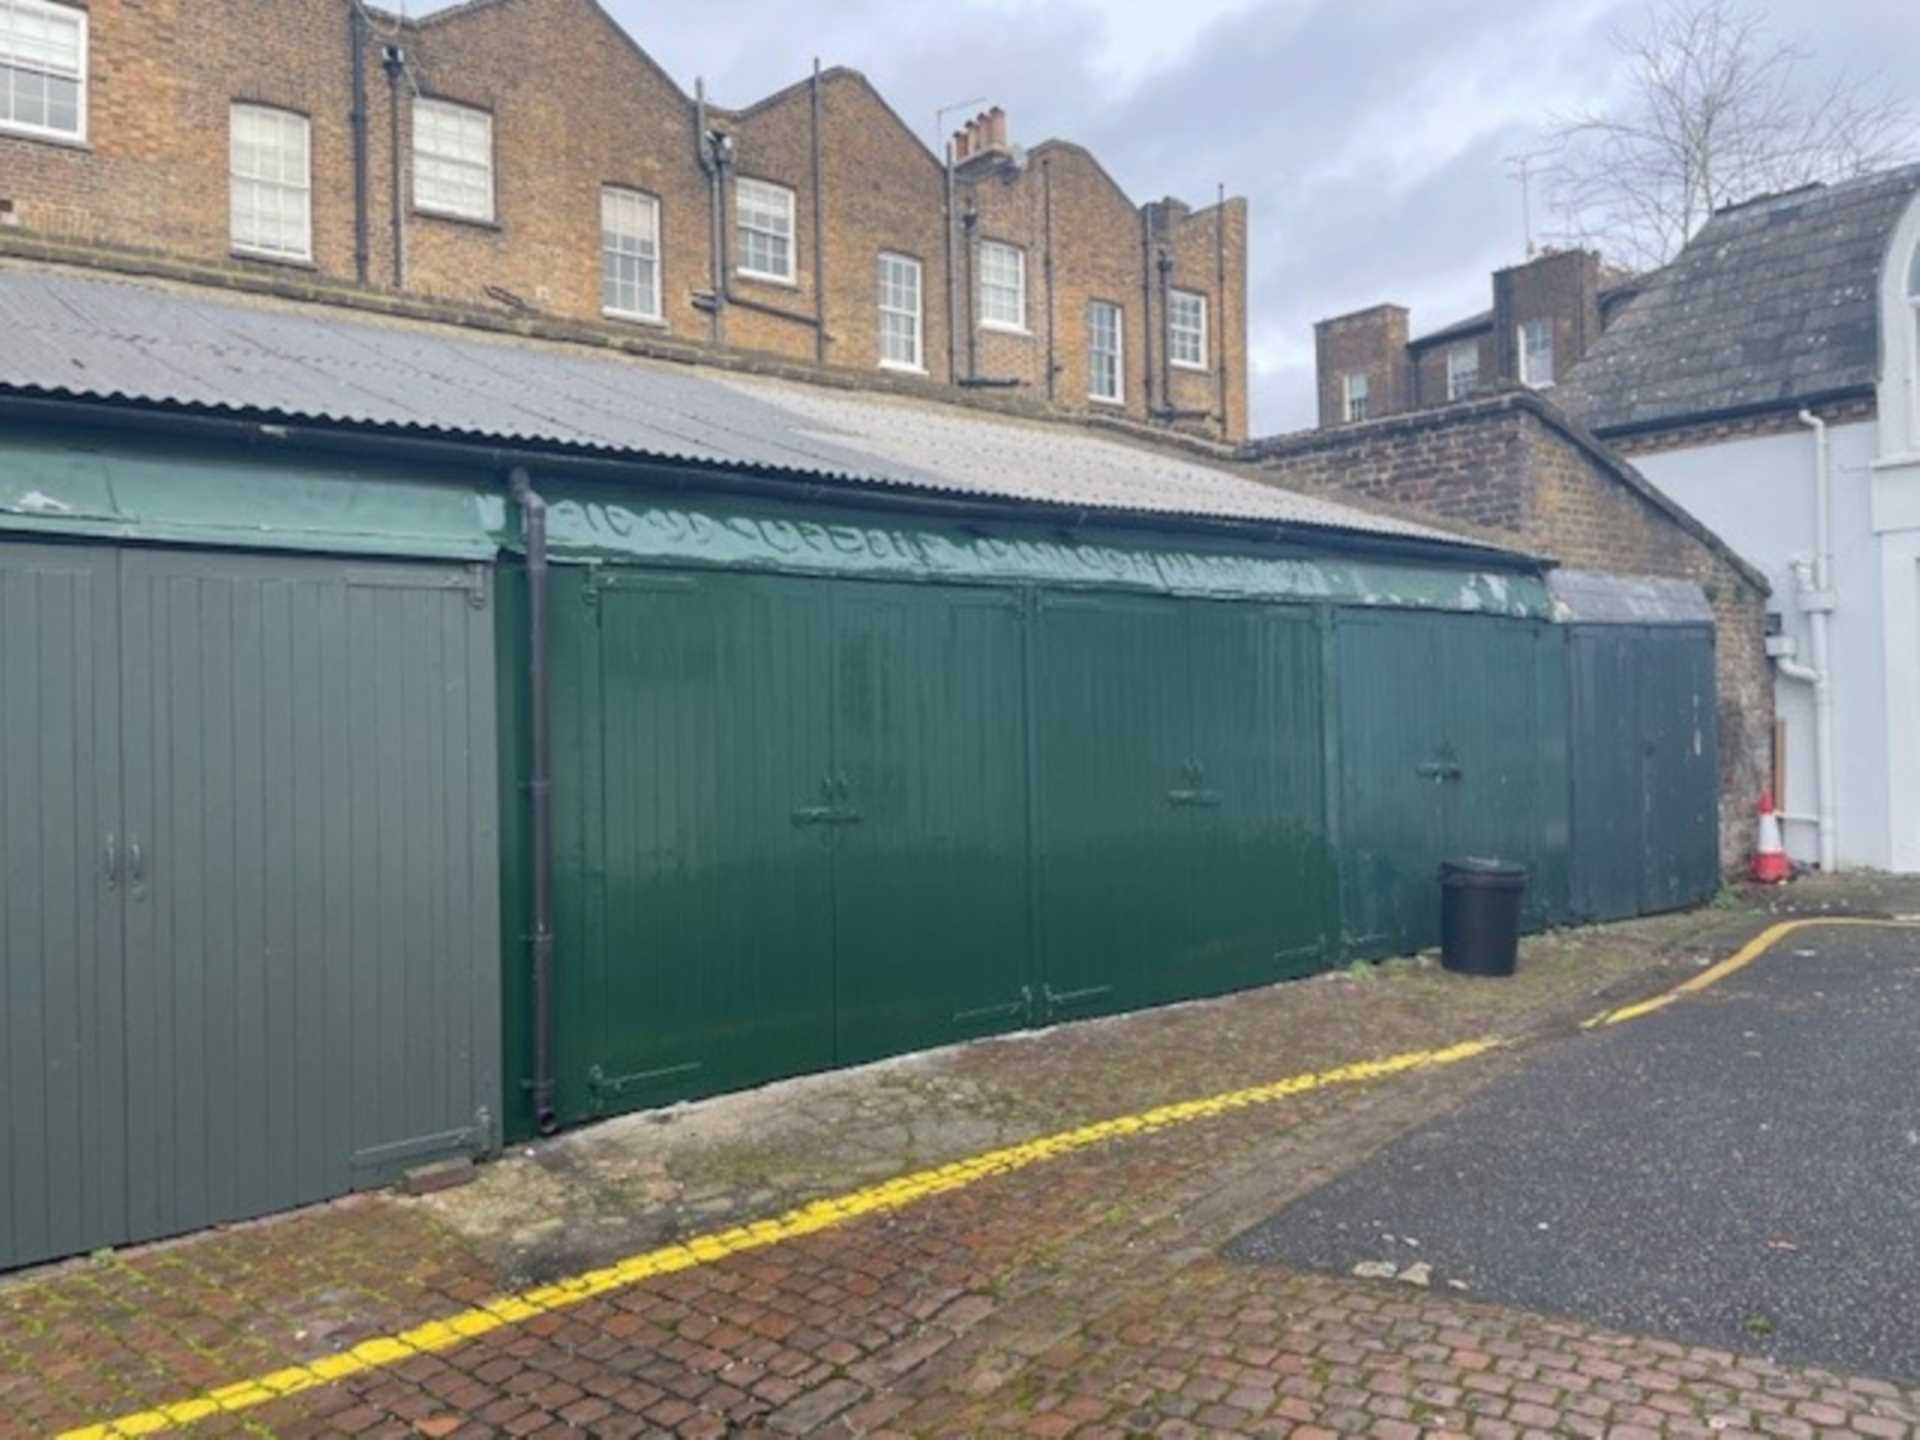 0 bed Garage for rent in London. From John Wilcox & Co